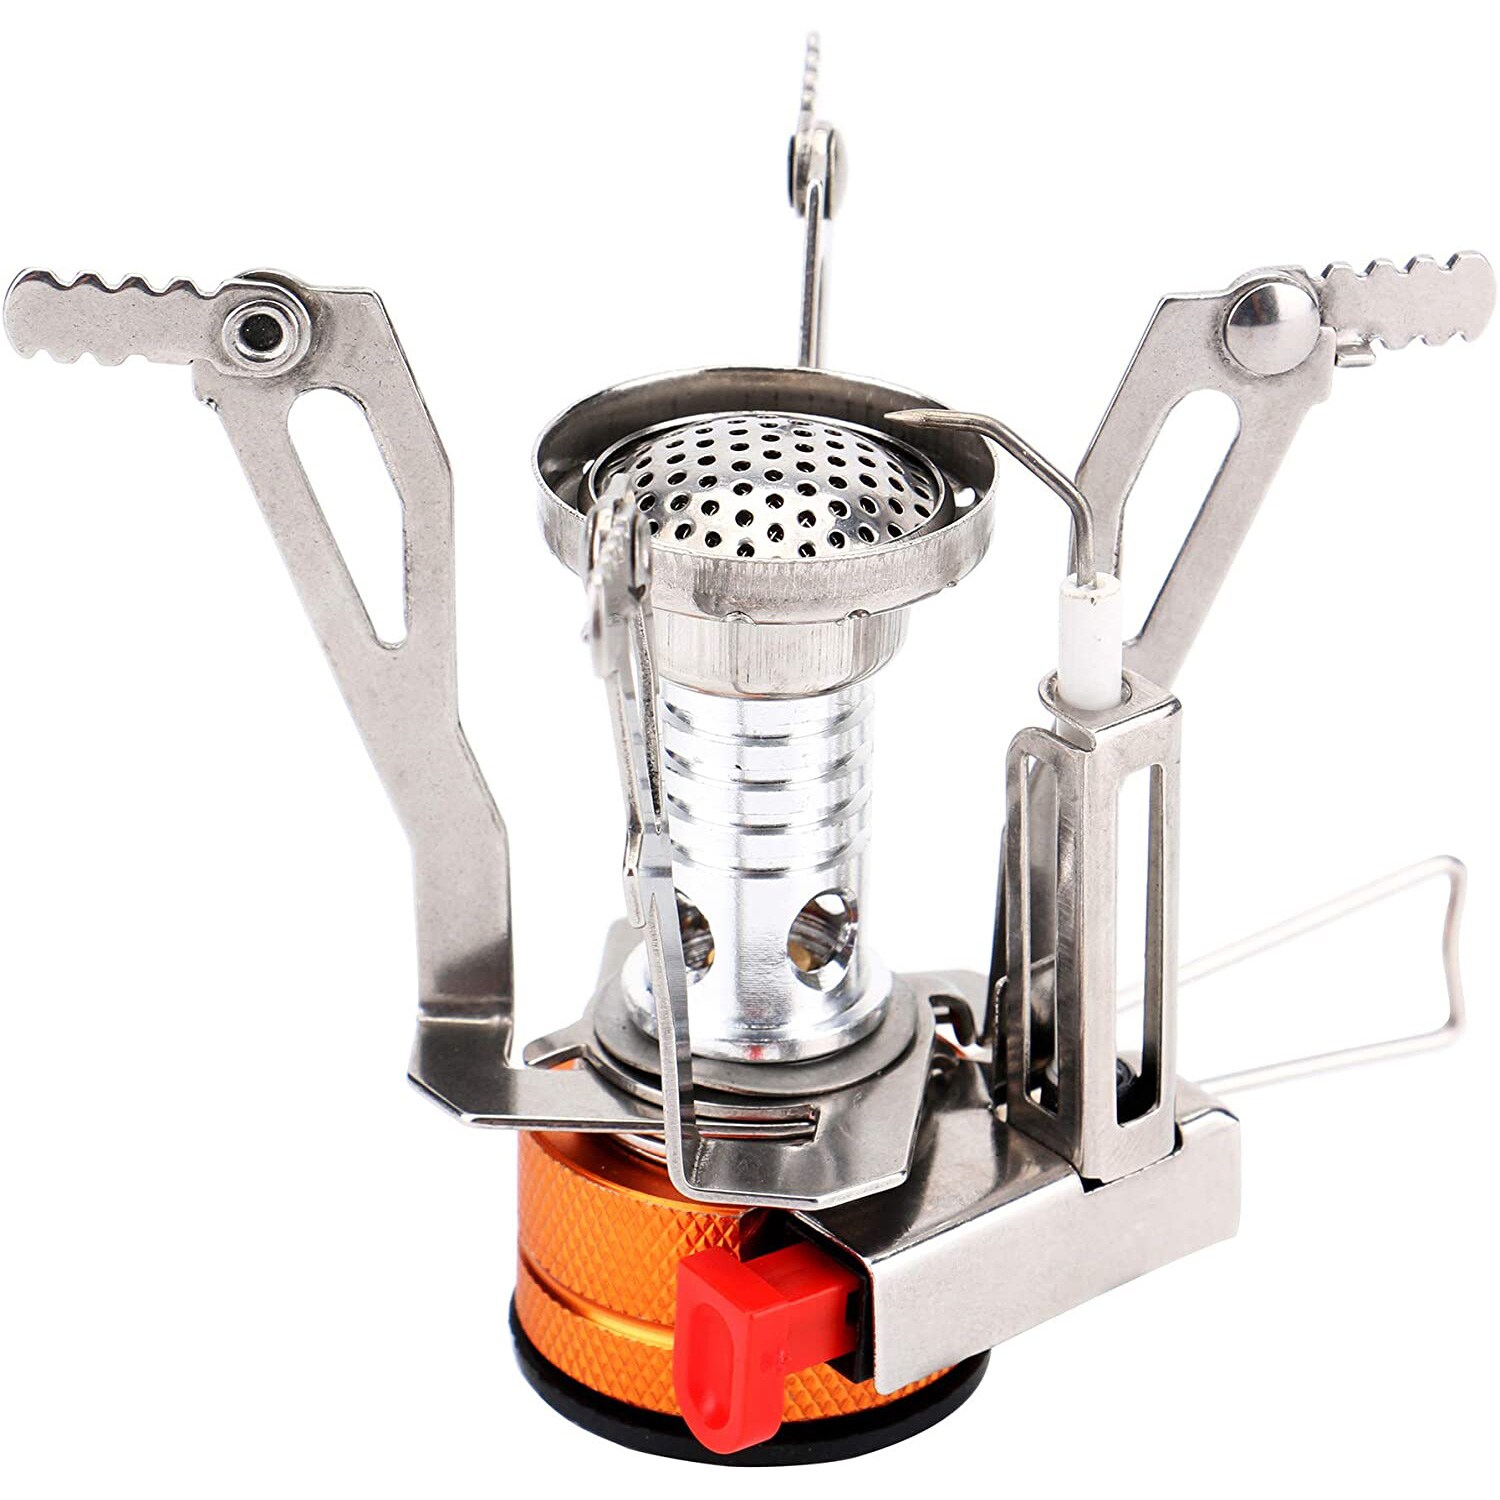 Portable Aluminum Alloy Small Gas Stove Burner Outdoor Hiking Picnic Food Cooker 